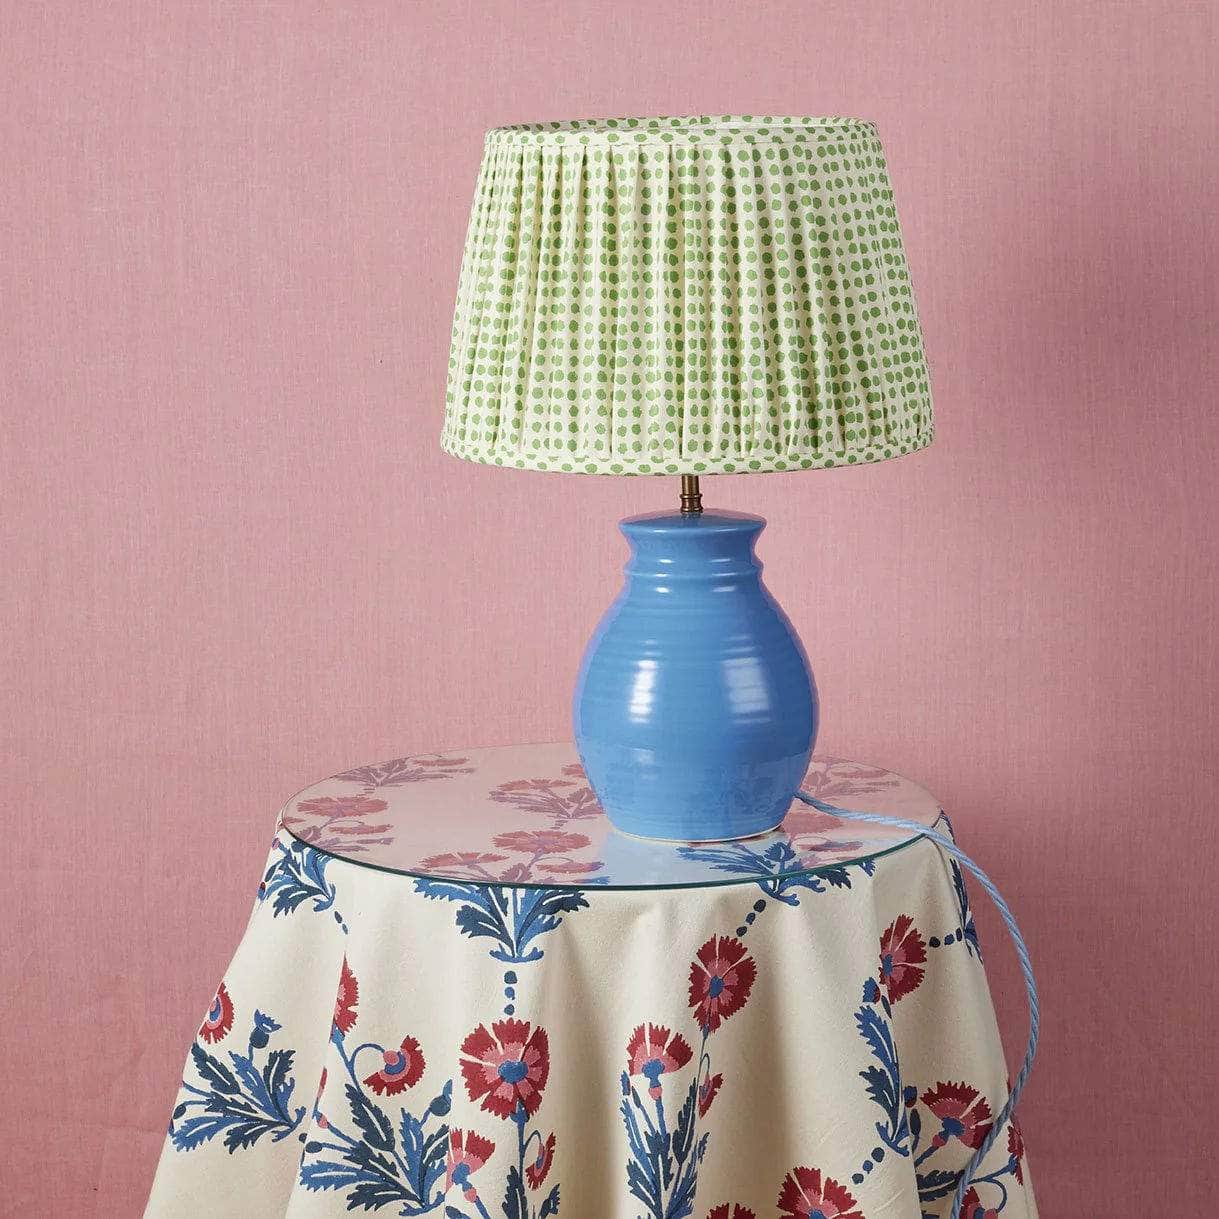 Pleated Seed Grass Large Lampshade